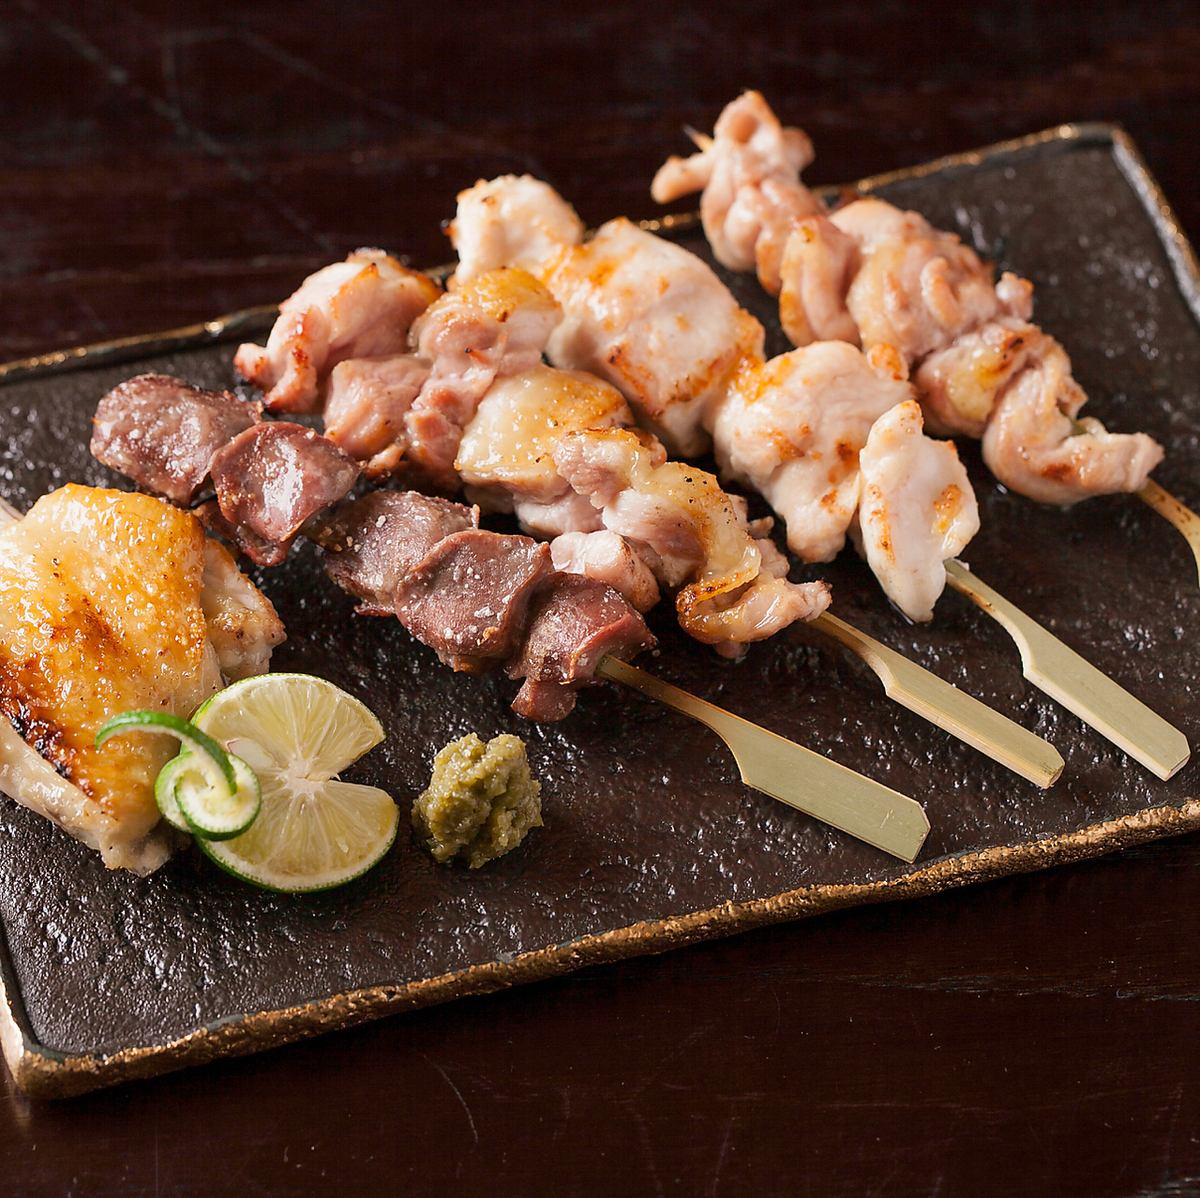 Our recommendation is seasonal Kyoto vegetables and Nanatani chicken dishes.